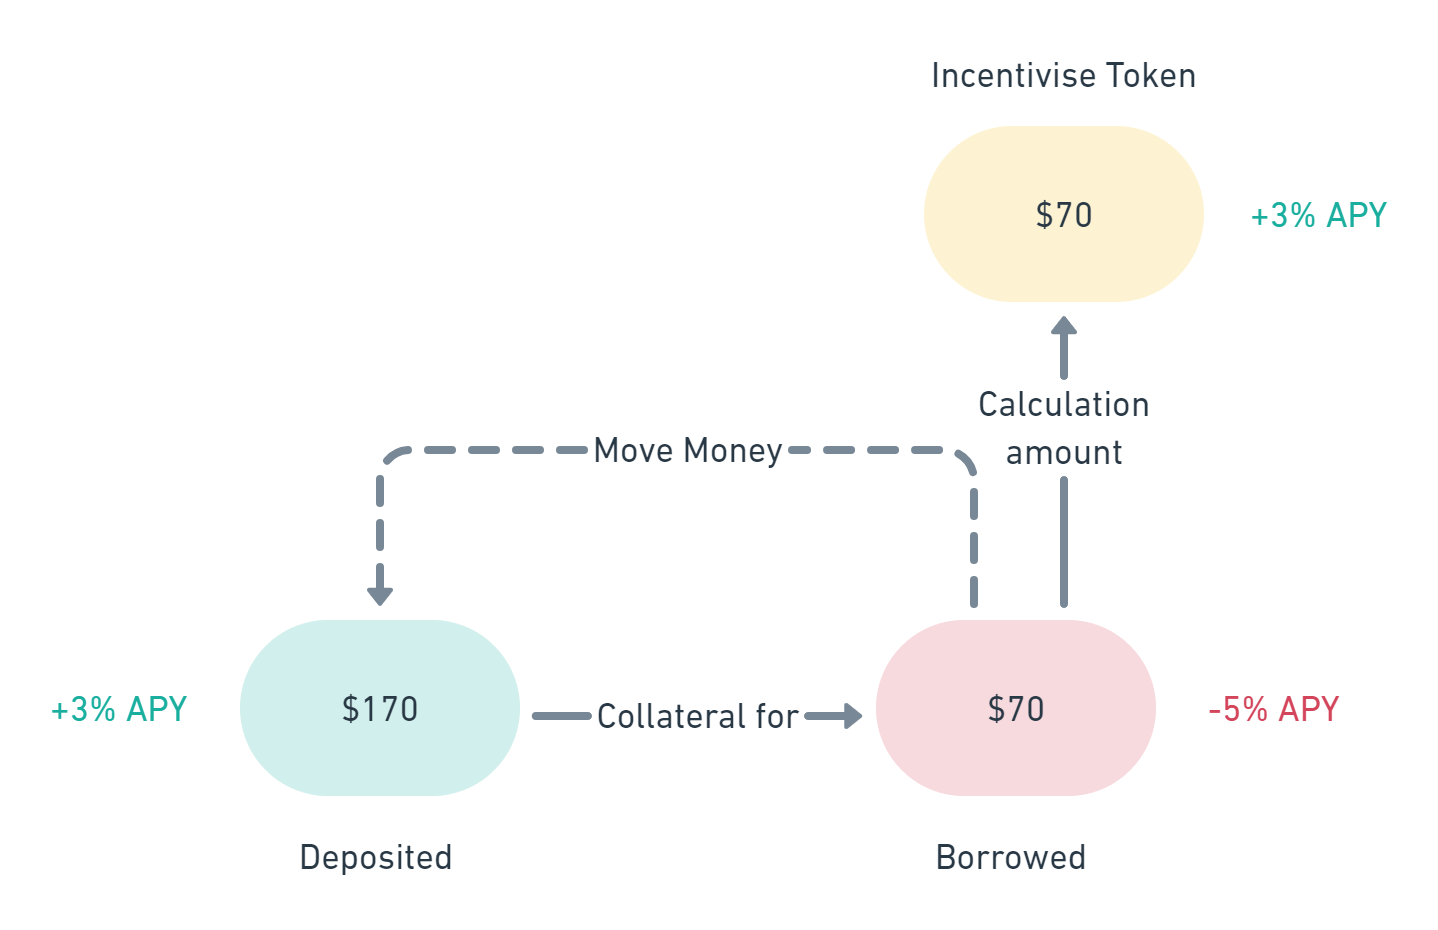 An example is when Lending Protocol has incentivized token